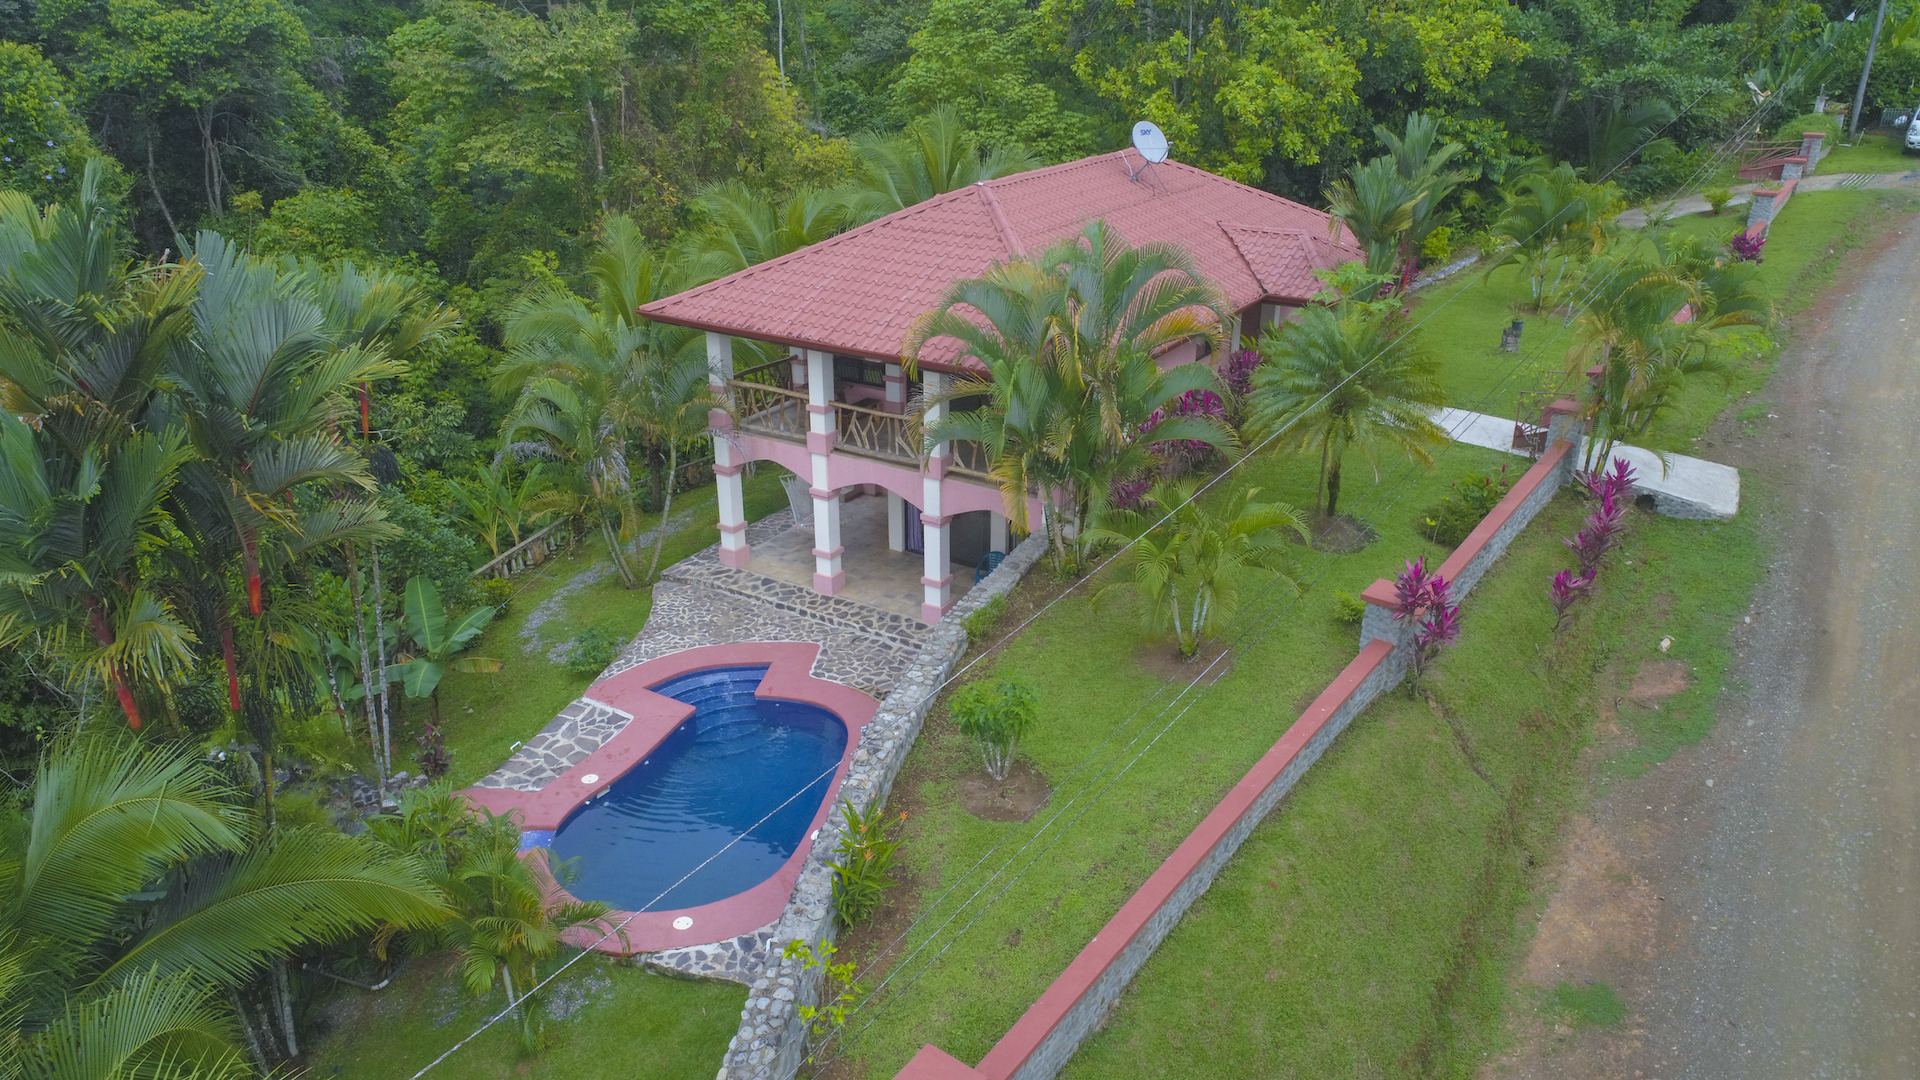 1.9 ACRES - 3 Bedroom Home With Pool And Good Access!!!!